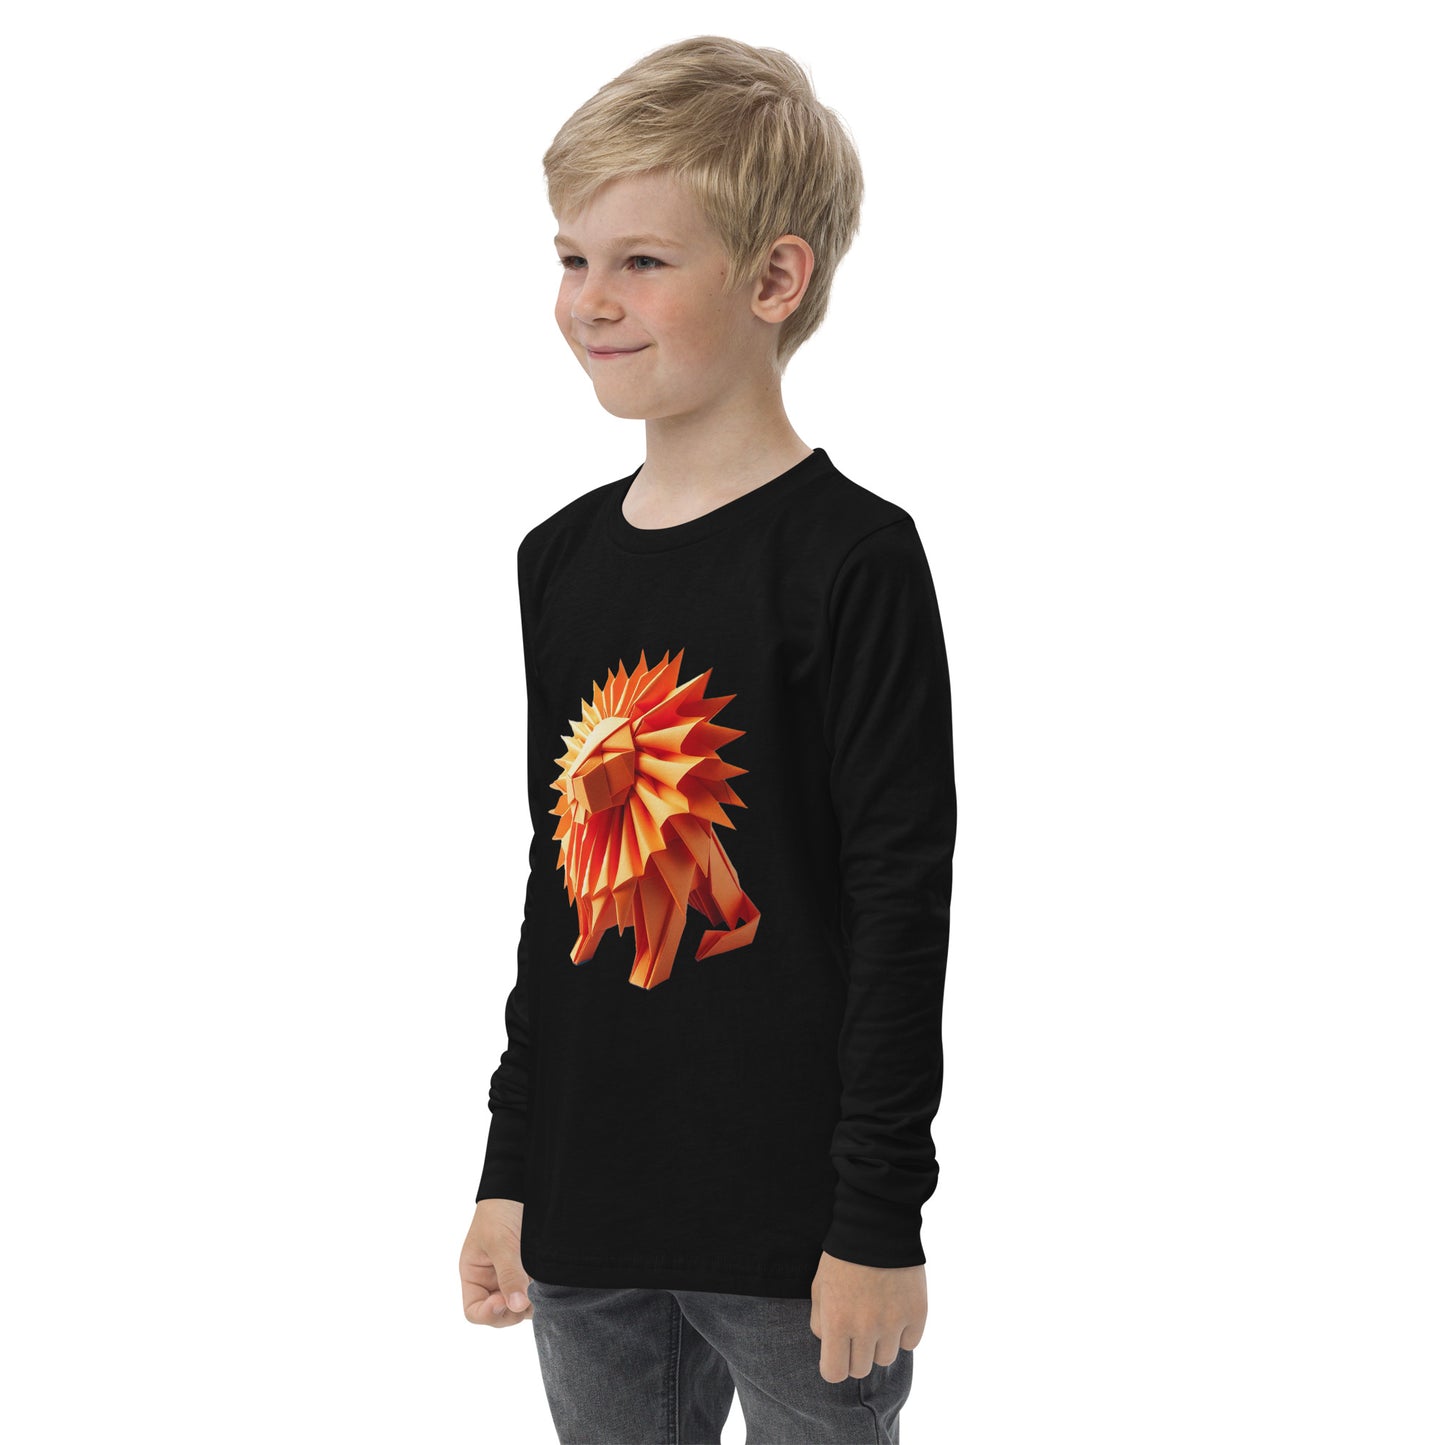 Youth with black long sleeve T-shirt with print of a lion